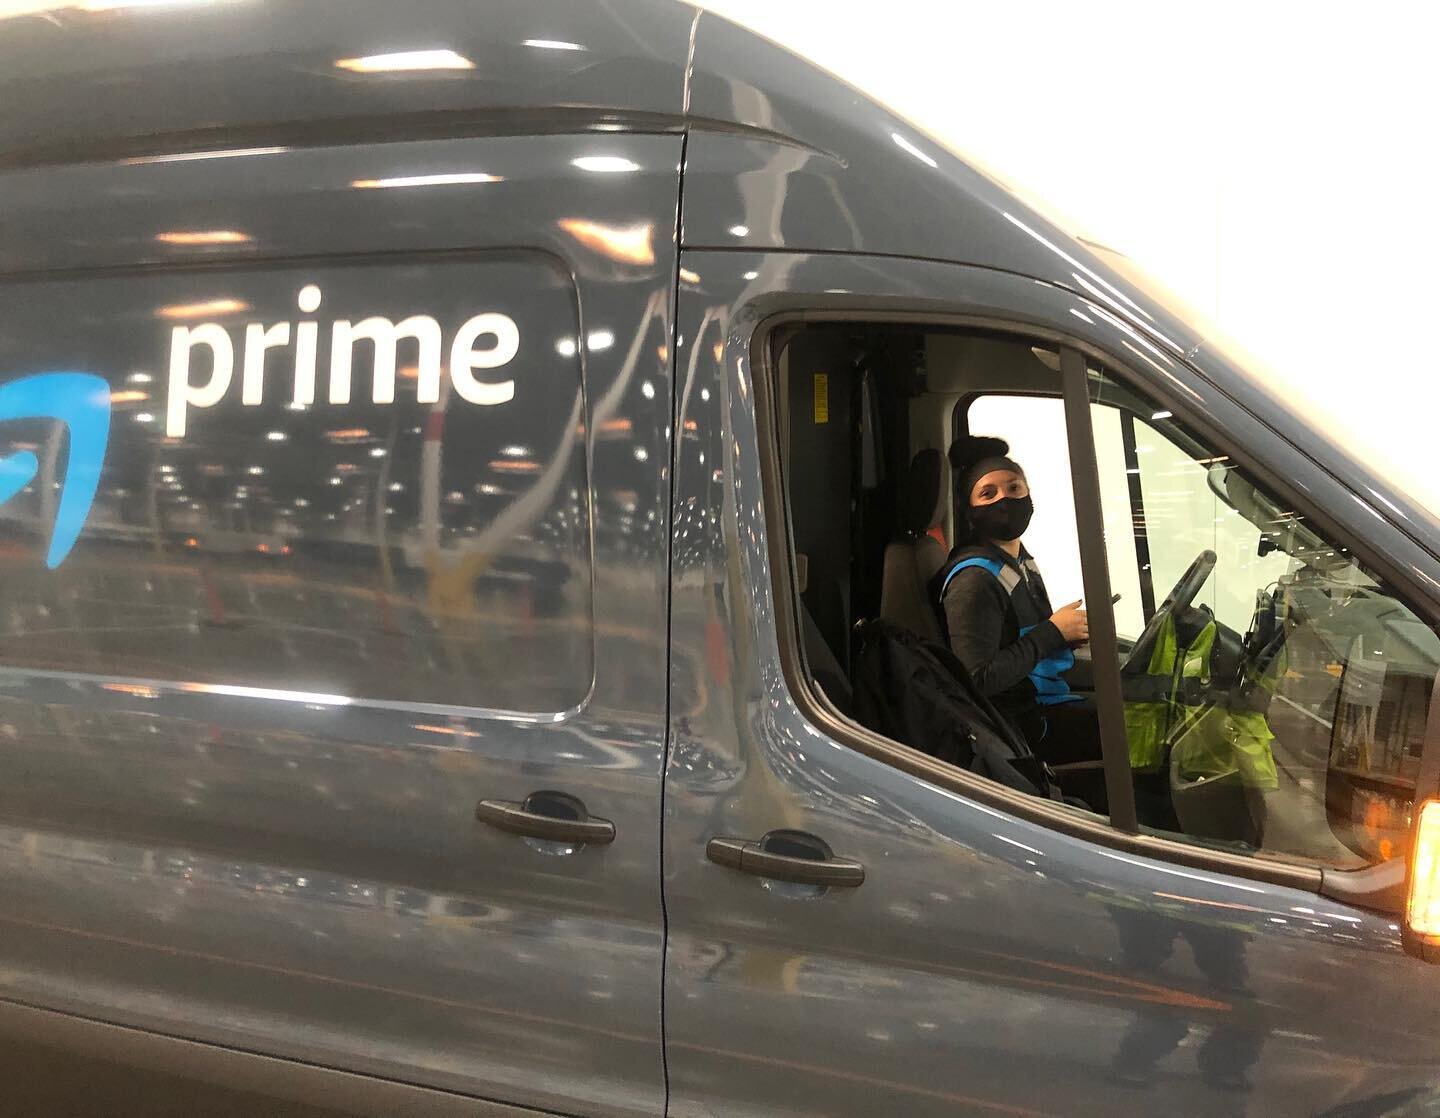 Another day delivering smiles😎⠀⠀⠀⠀⠀⠀⠀⠀⠀
⠀⠀⠀⠀⠀⠀⠀⠀⠀
💥 We&rsquo;re hiring!💥 Now looking to fill immediate openings for Amazon Delivery Associates in Kent, WA 📦 👉🏼visit the link in our bio for more information 👈🏼 ⠀⠀⠀⠀⠀⠀⠀⠀⠀
⠀⠀⠀⠀⠀⠀⠀⠀⠀
#amazon #recr